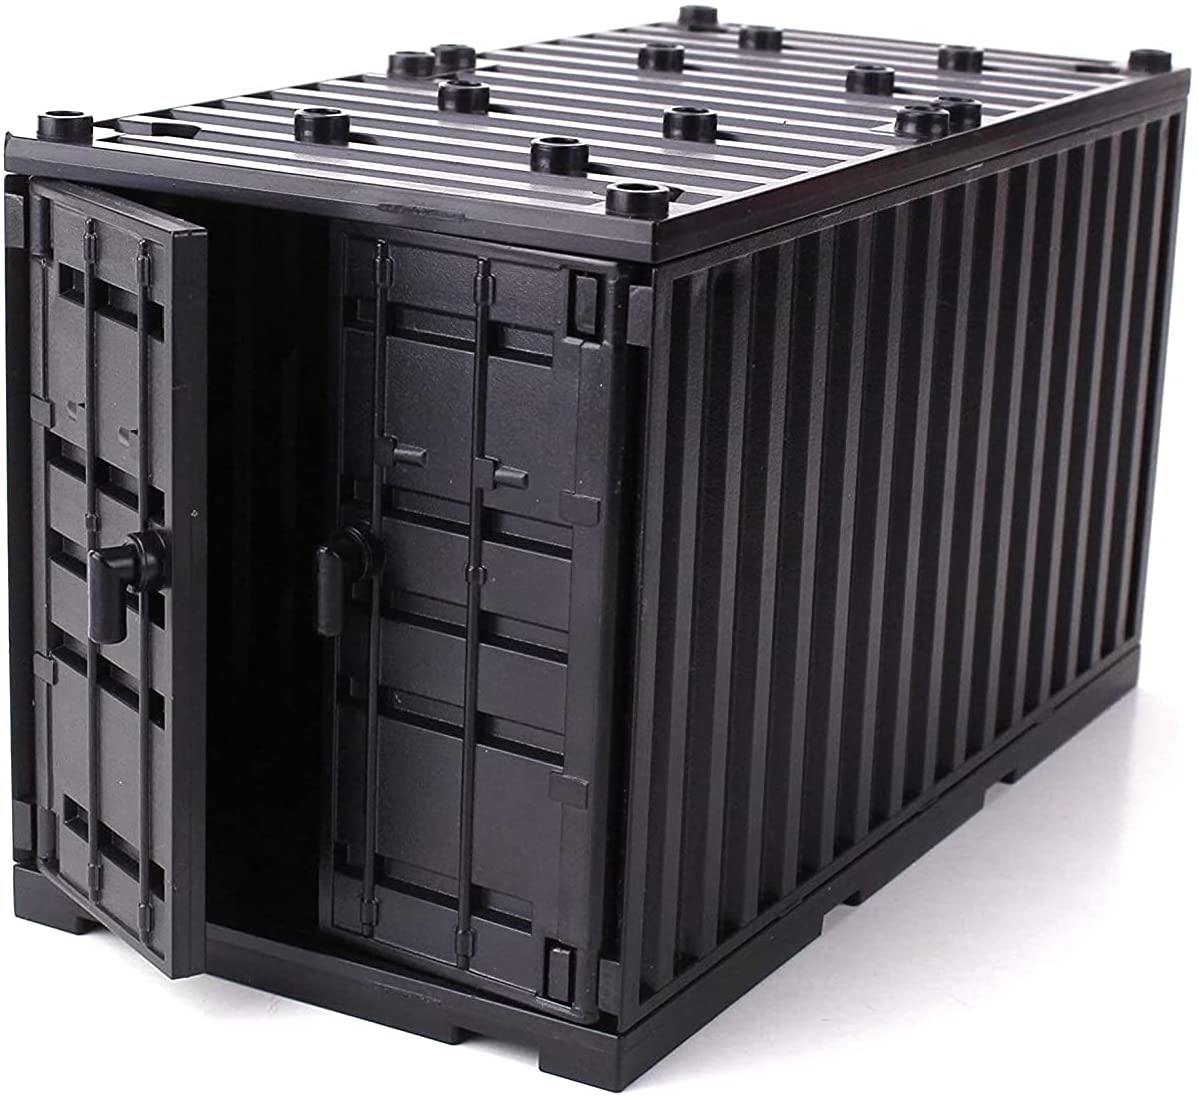 Black Cargo Shipping Container - LEGO Minifig Scale, Compatible